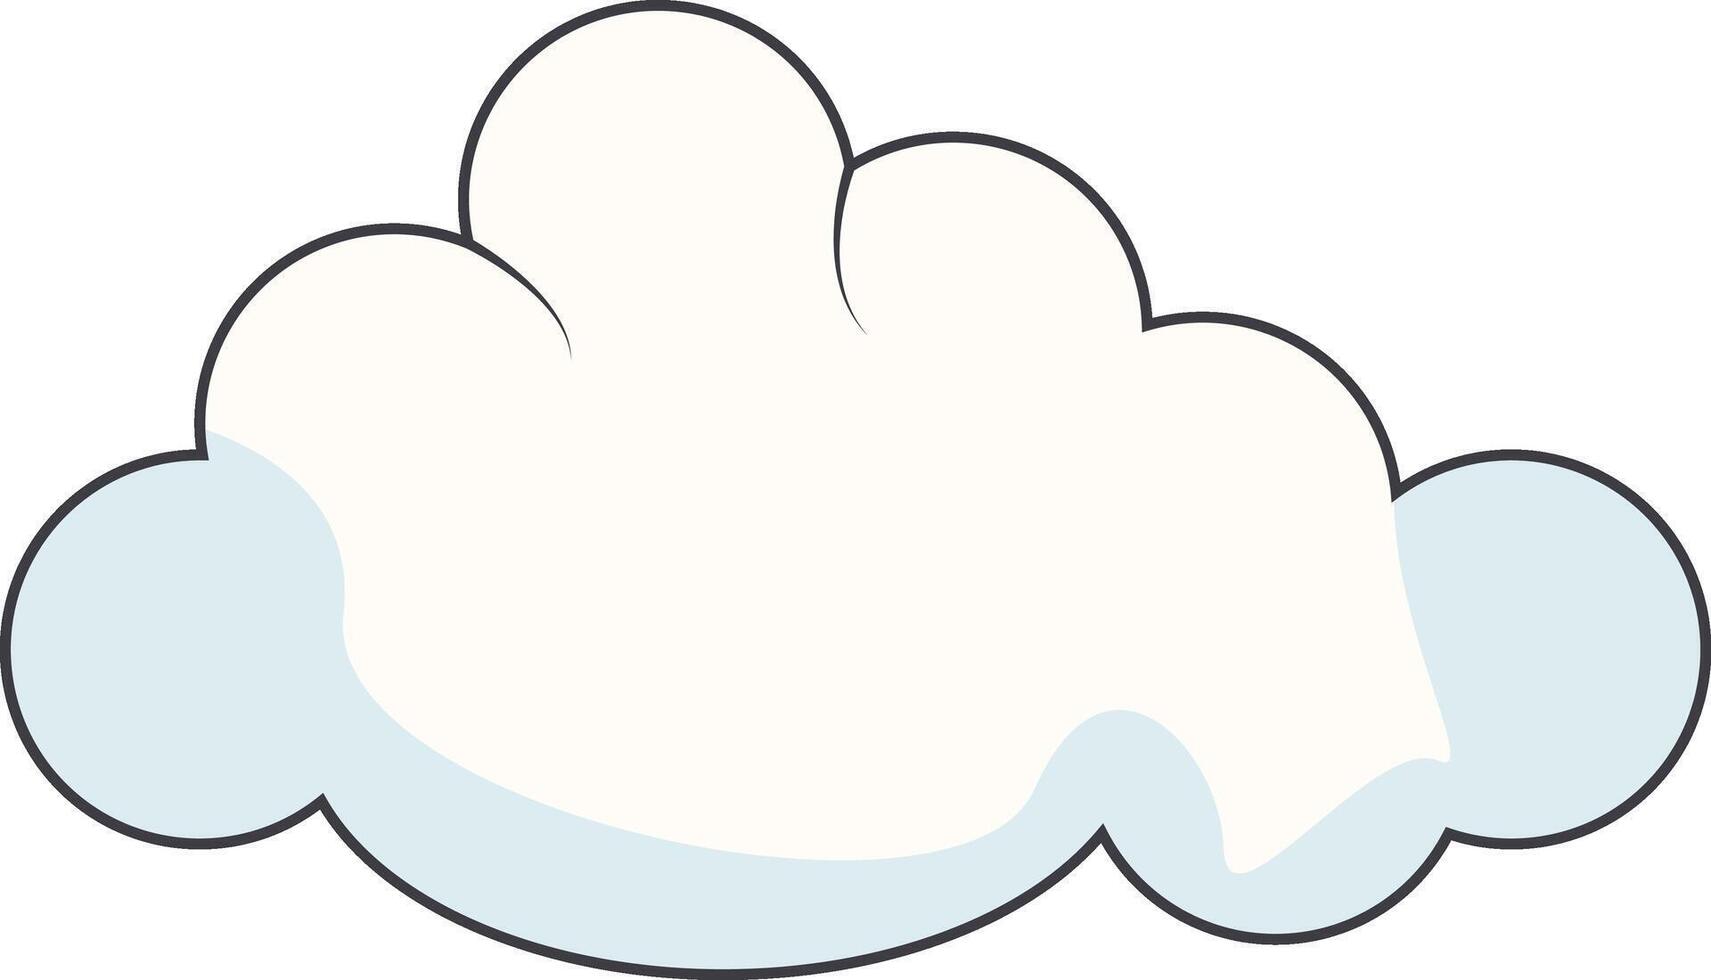 Cartoon Clouds on White Background. For Comic Ornament vector